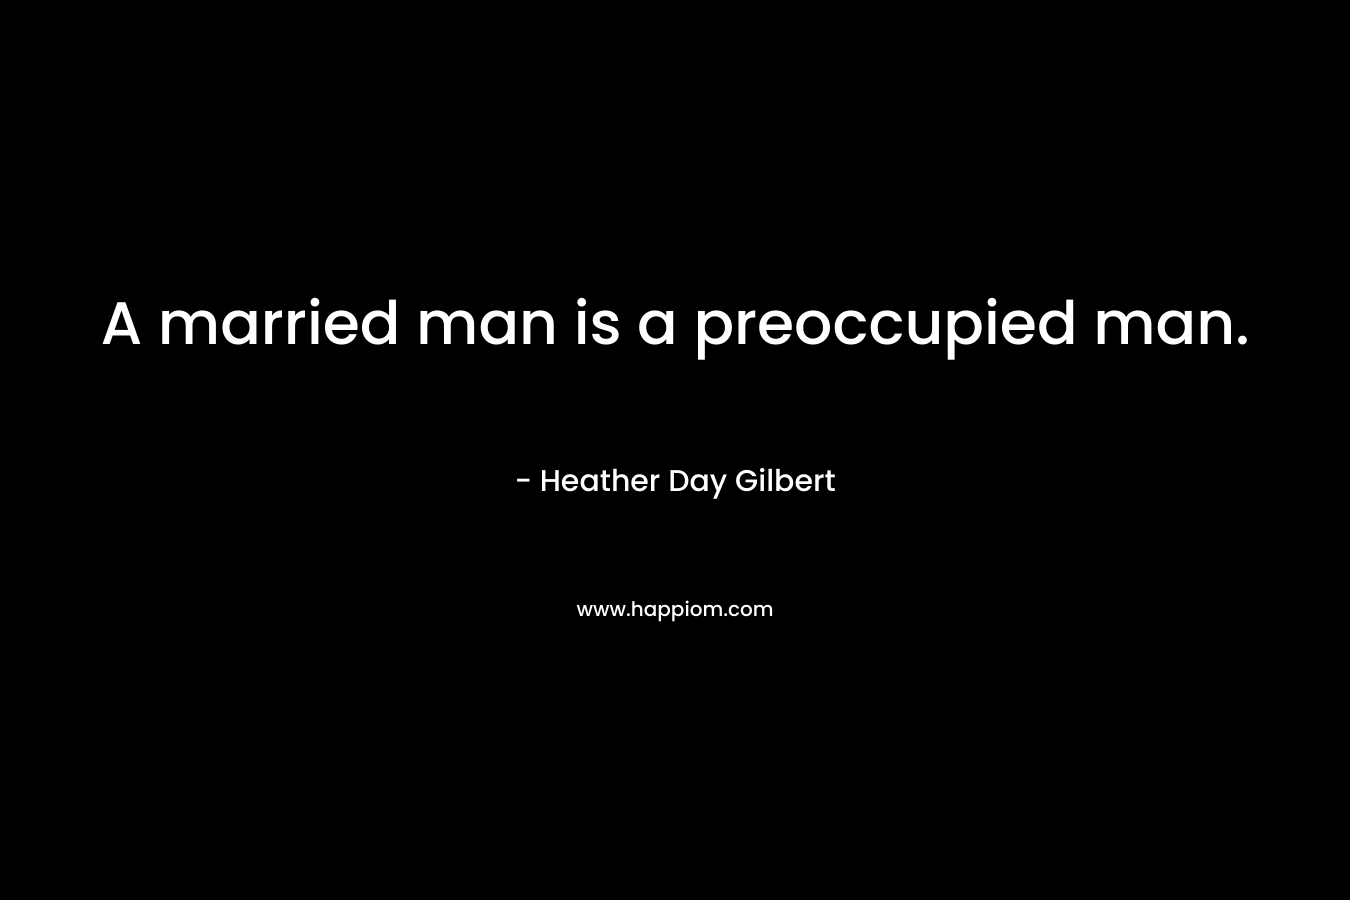 A married man is a preoccupied man. – Heather Day Gilbert